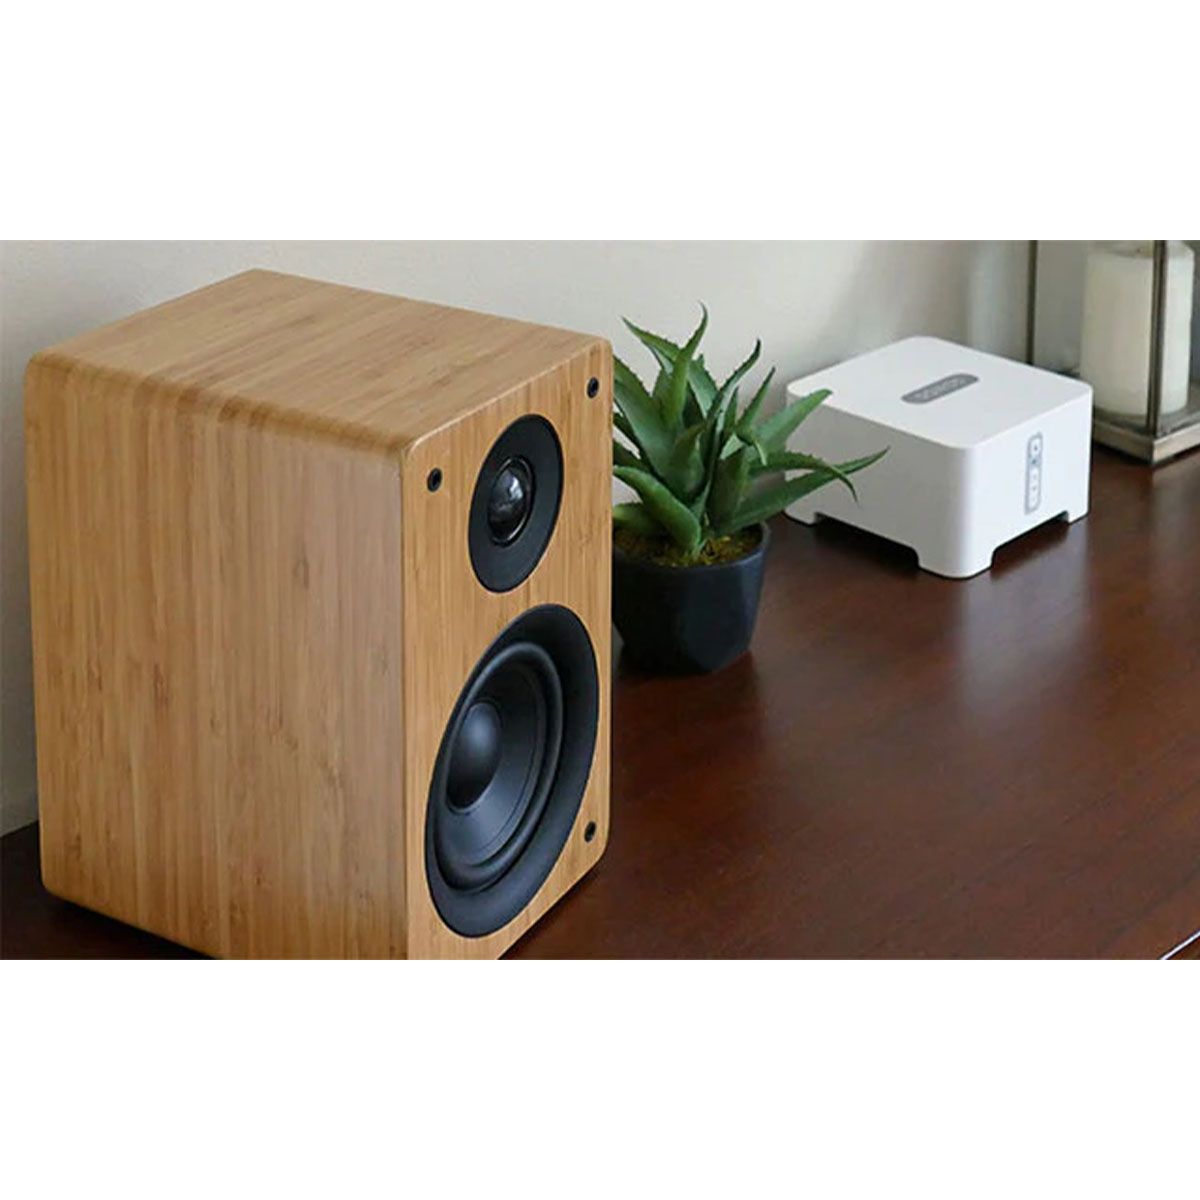 Peachtree M24 Powered Speakers - Bamboo single speaker - lifestyle image angled front view